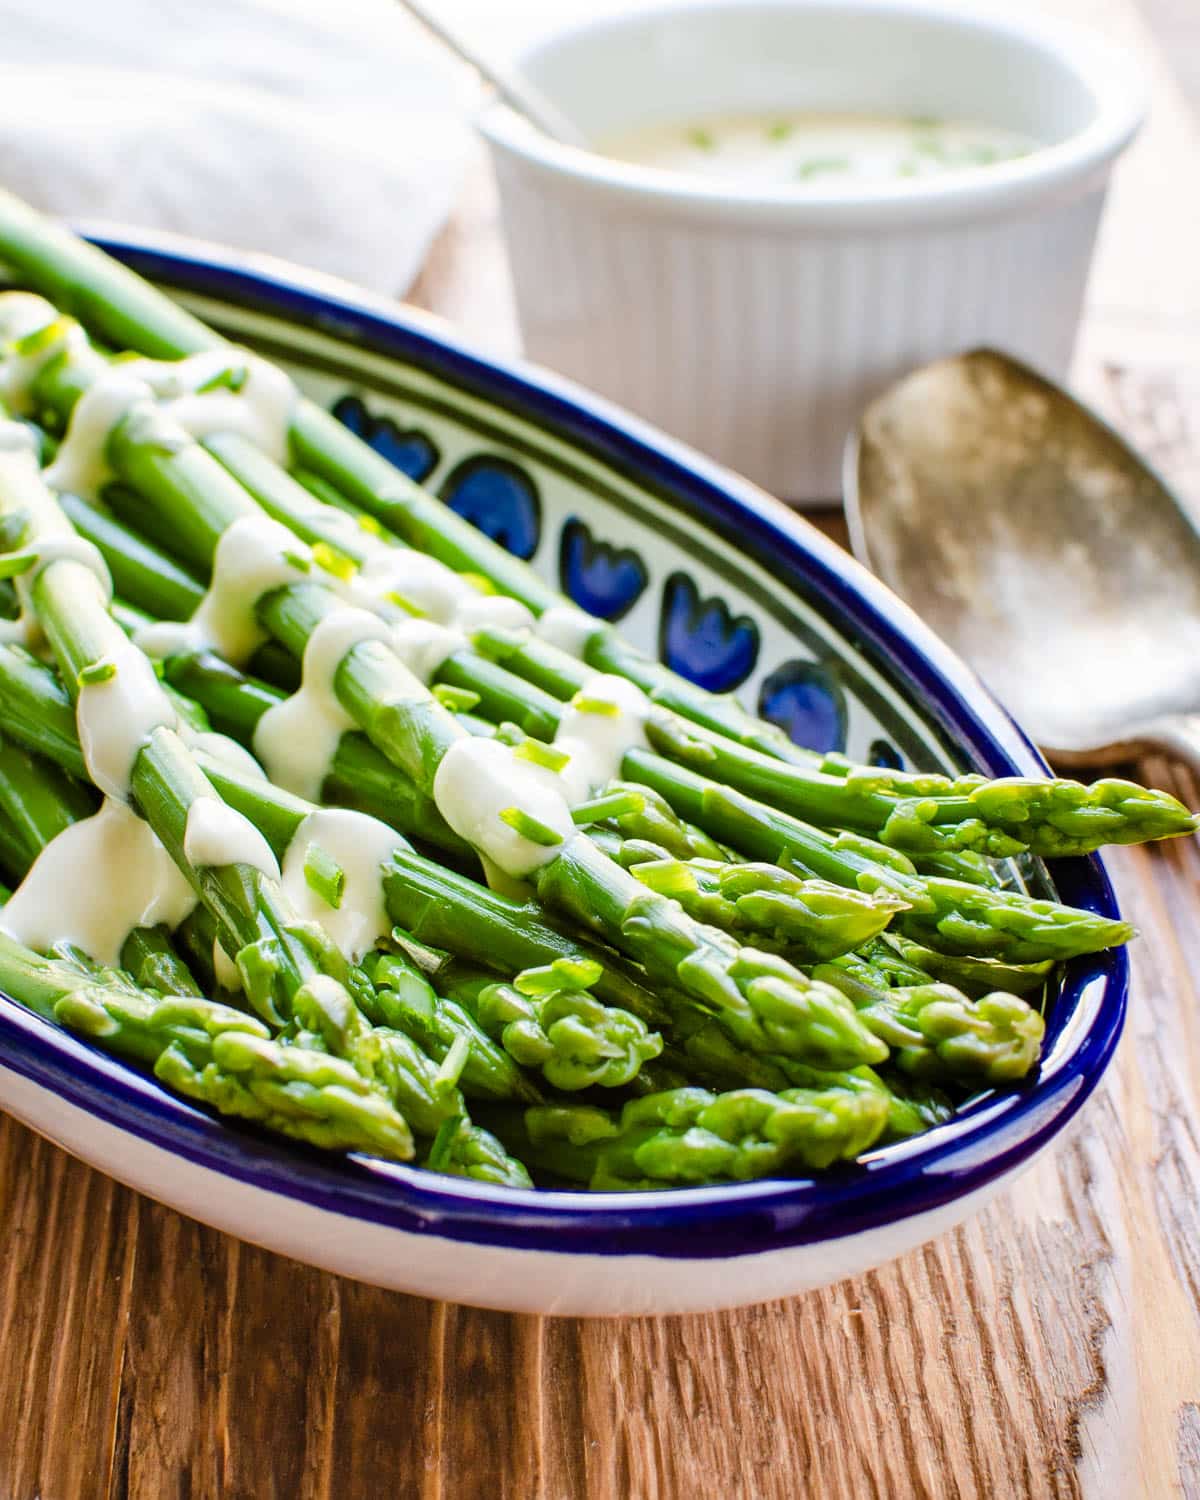 Serving cooked asparagus with Dijon dressing.